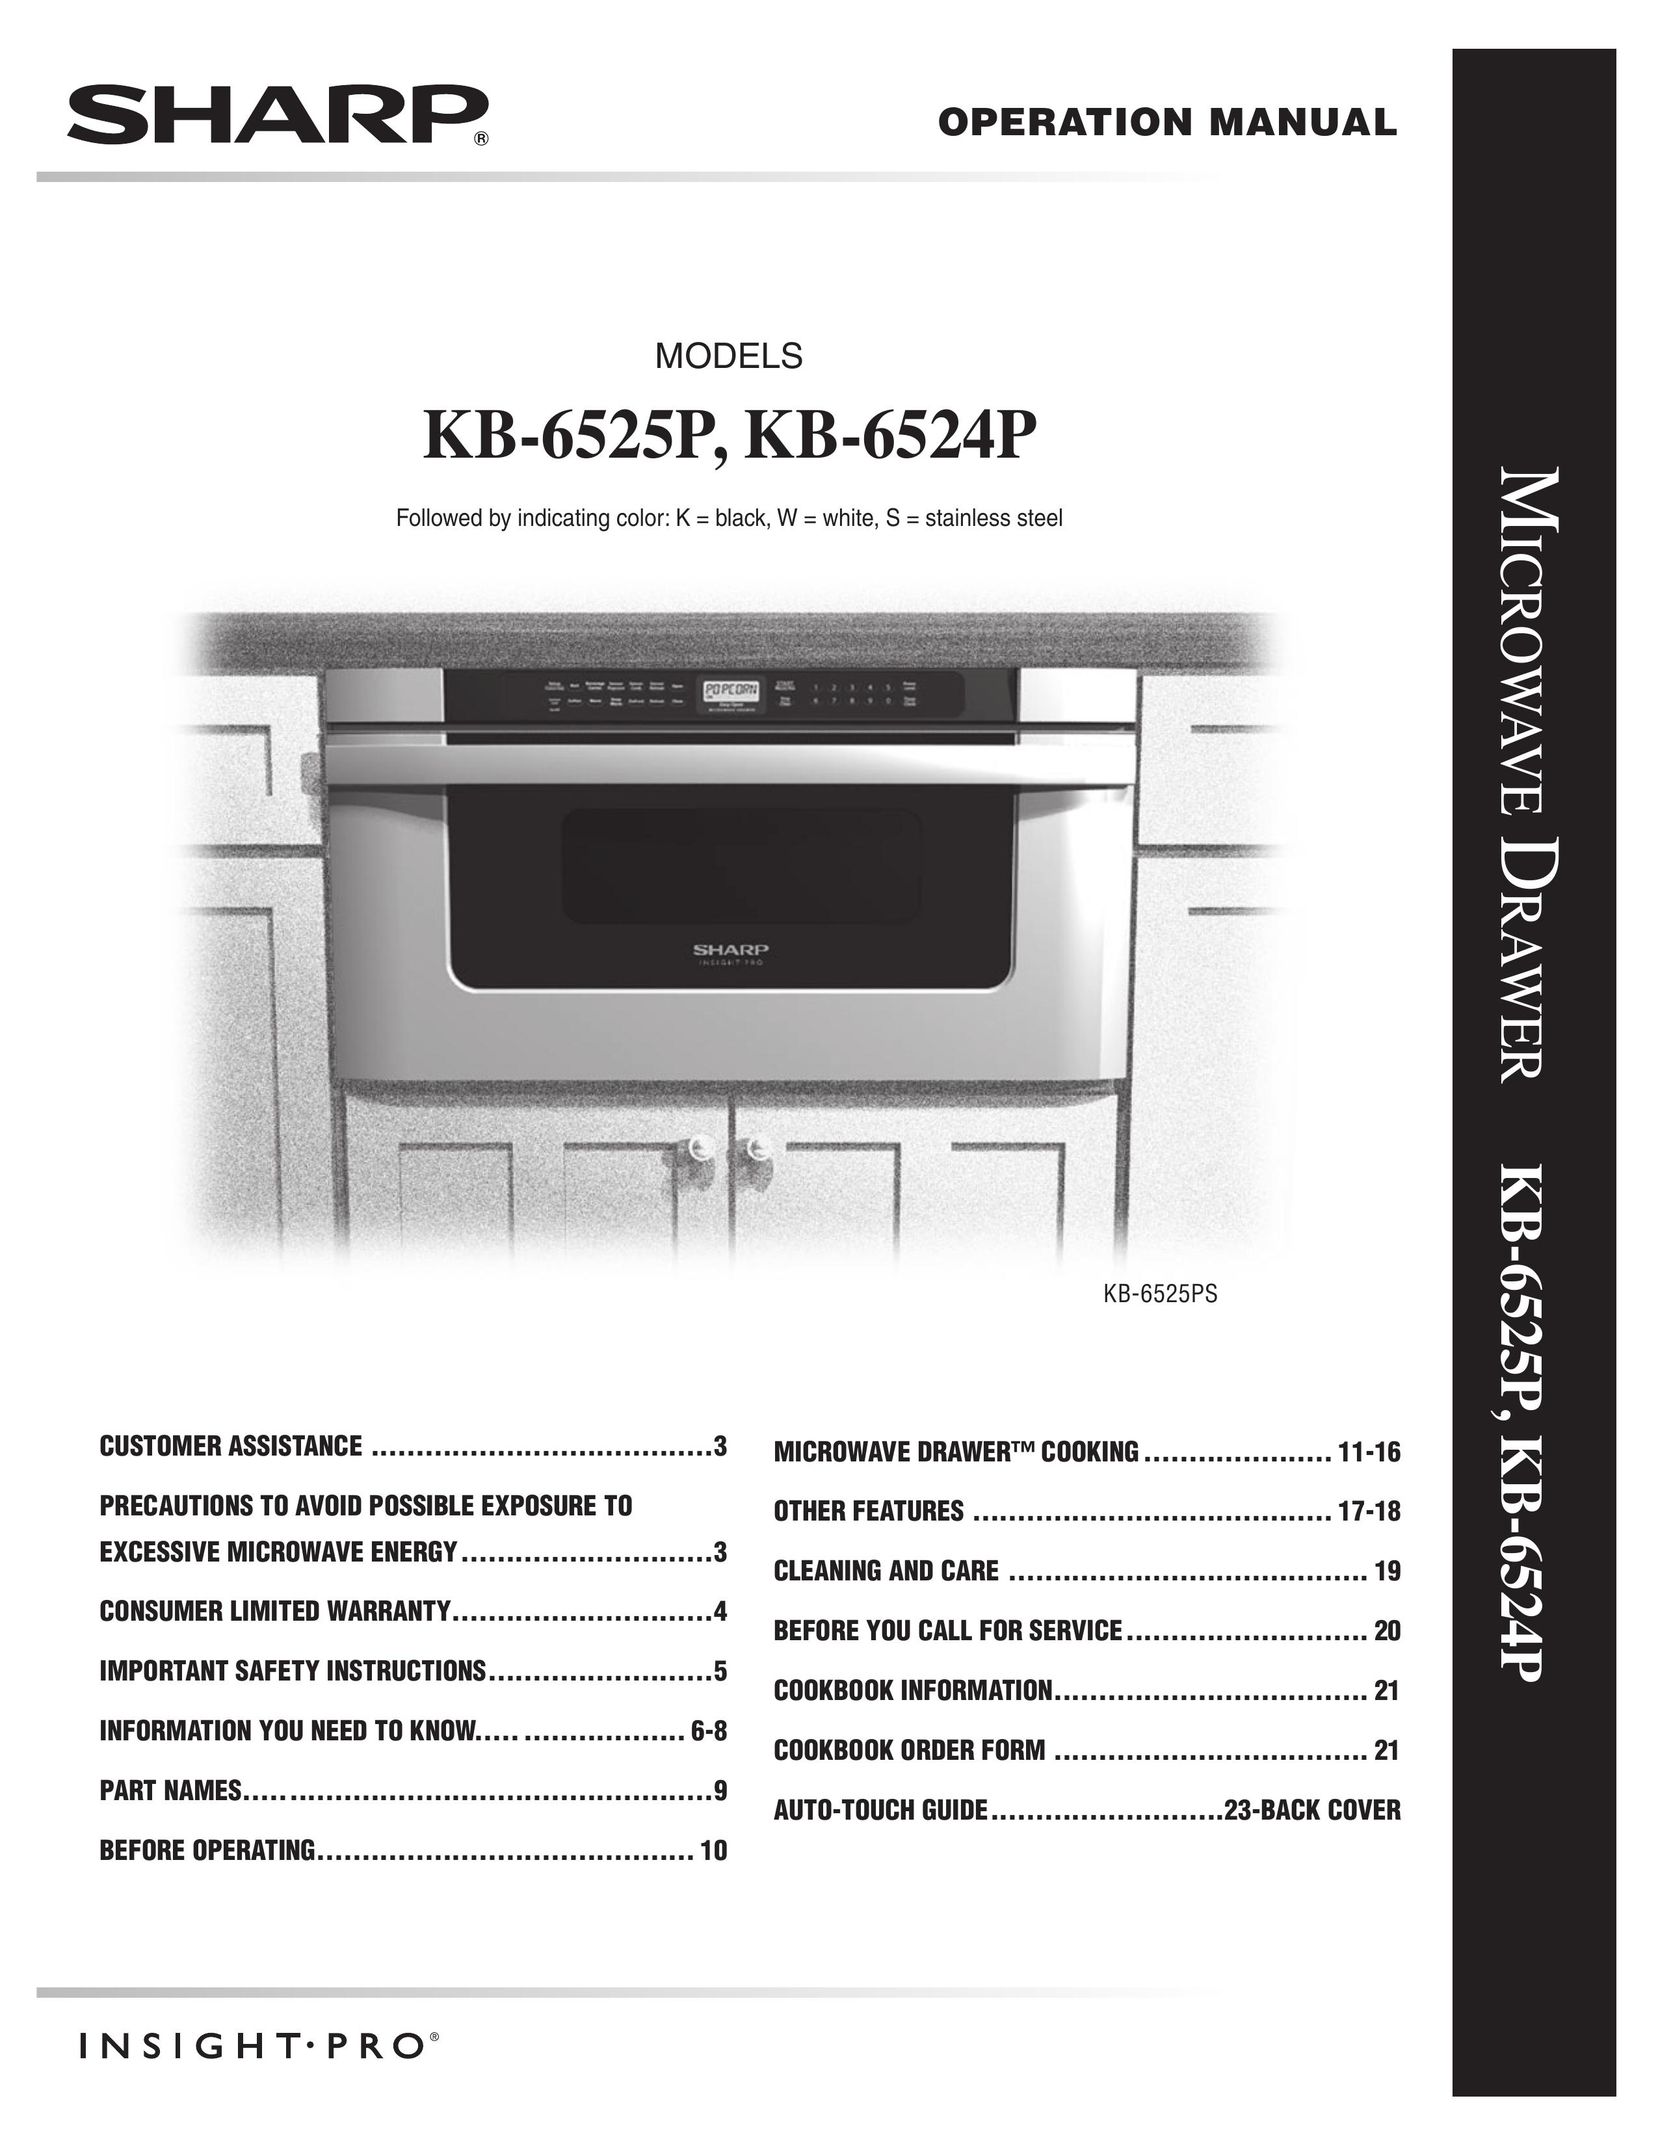 Sharp KB-6524PS Microwave Oven User Manual